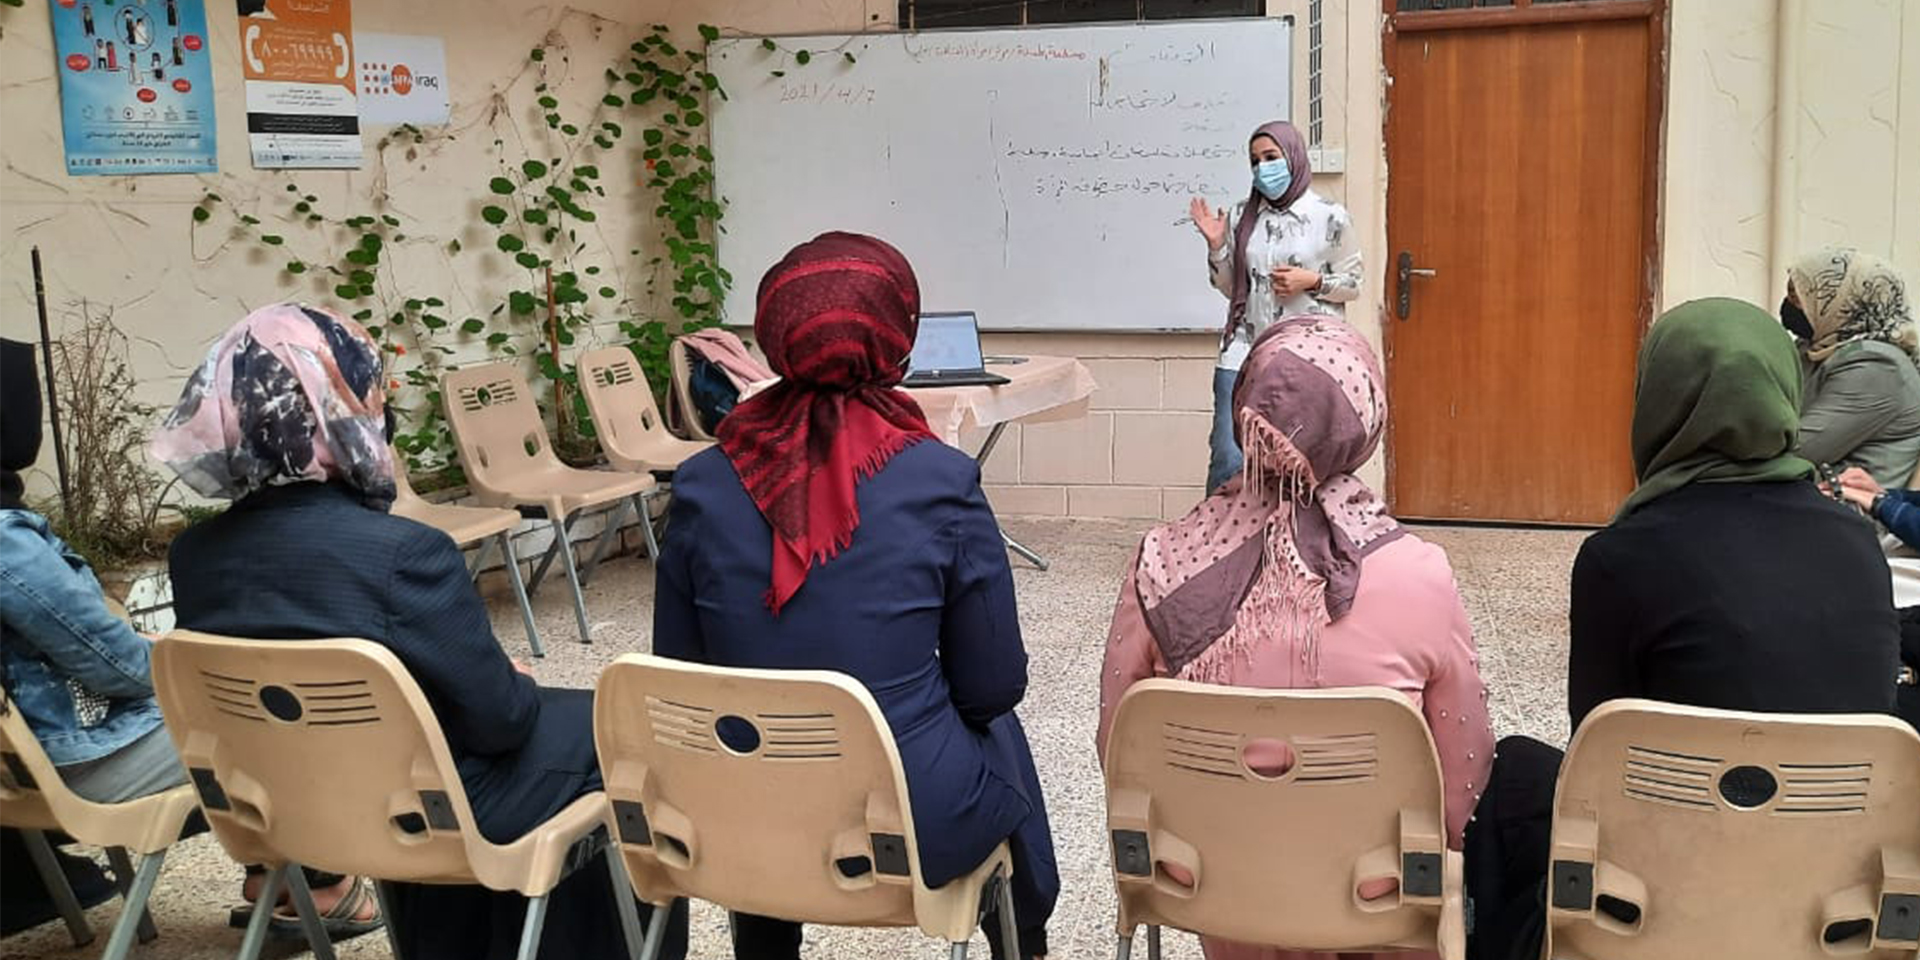 Image of several women in a classroom sitting in chairs and listening to a presentation led by a woman standing next to a whiteboard.